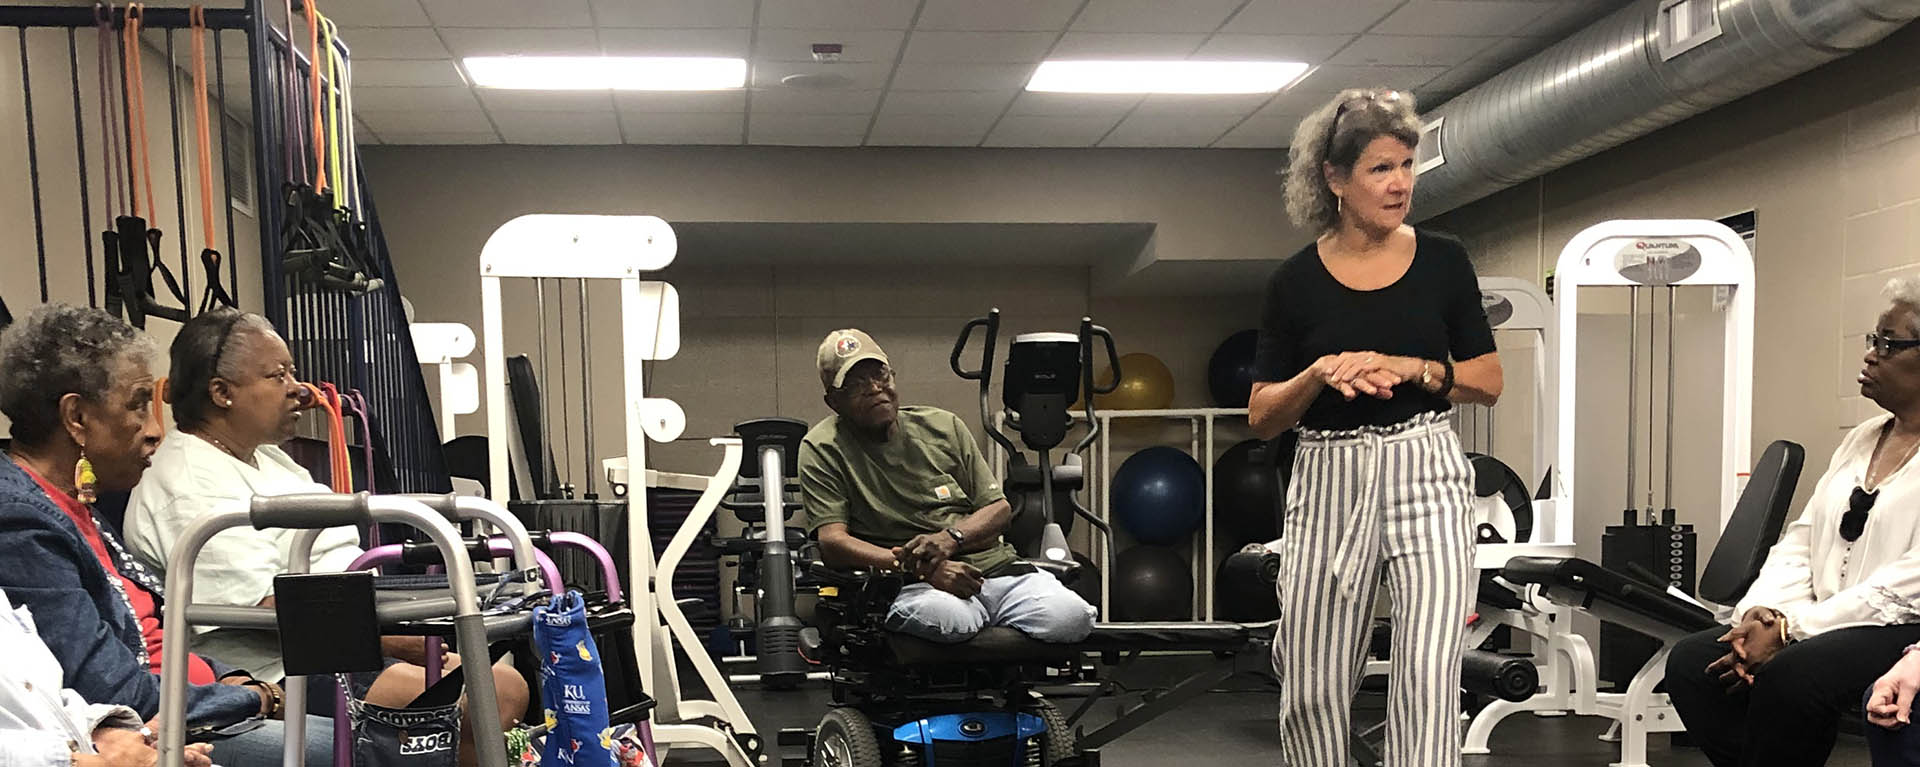 WU moves trainer speaking with community member clients in the gym.